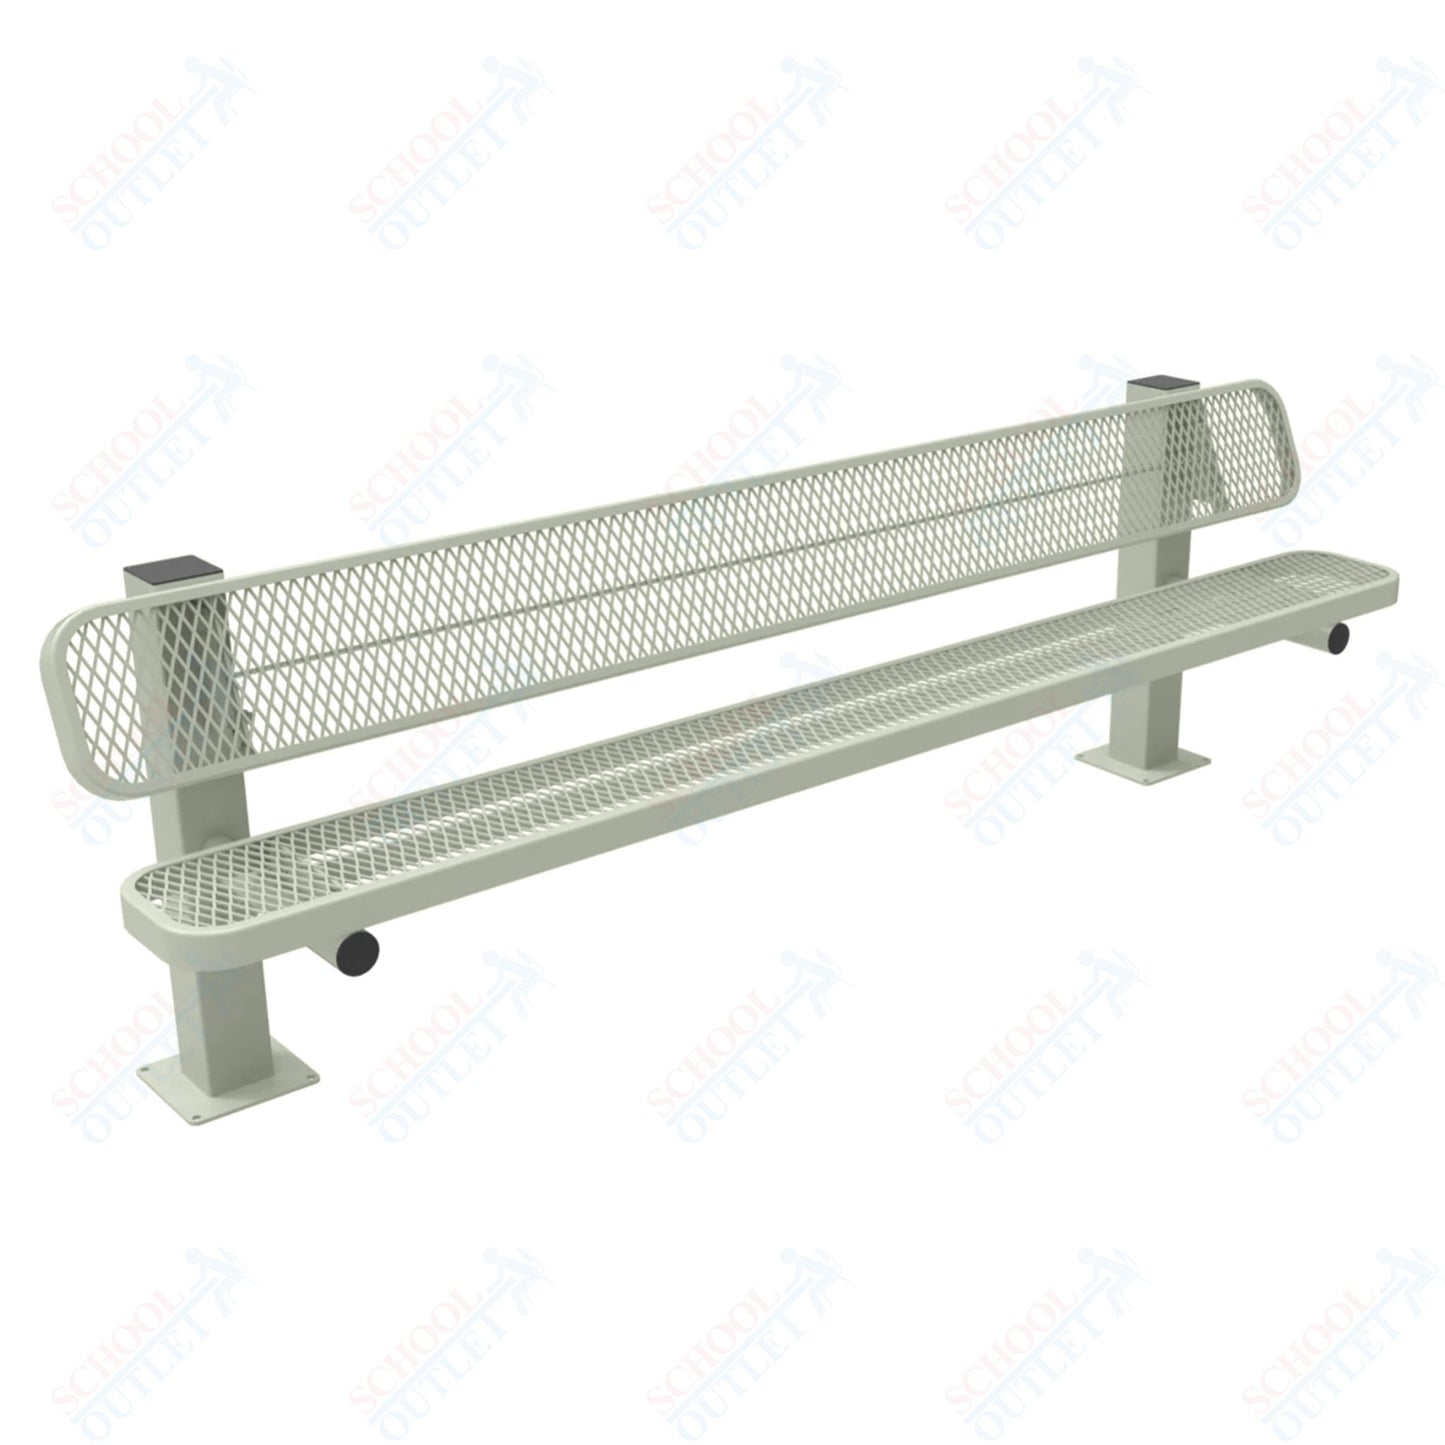 MyTcoat - Single Pedstal Outdoor Bench with Back - Surface Mount 8' L (MYT-BRT08-62)